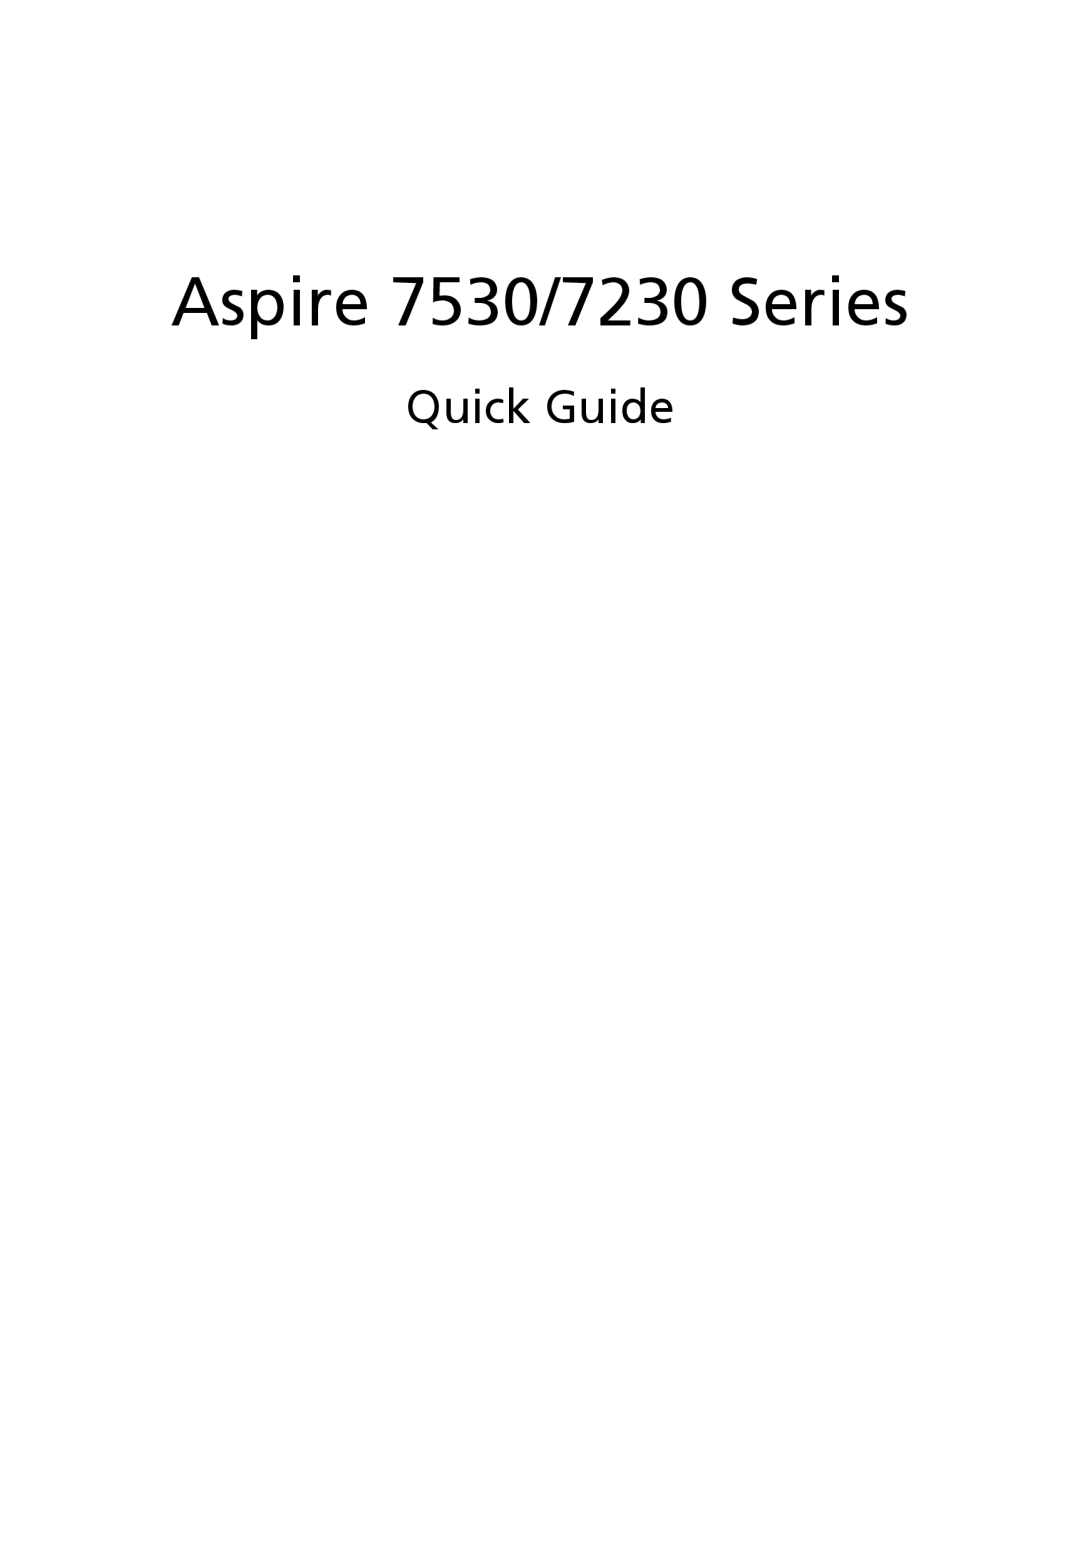 Acer 7530G, ZY5 manual Quick Guide, Aspire 7530/7230 Series 